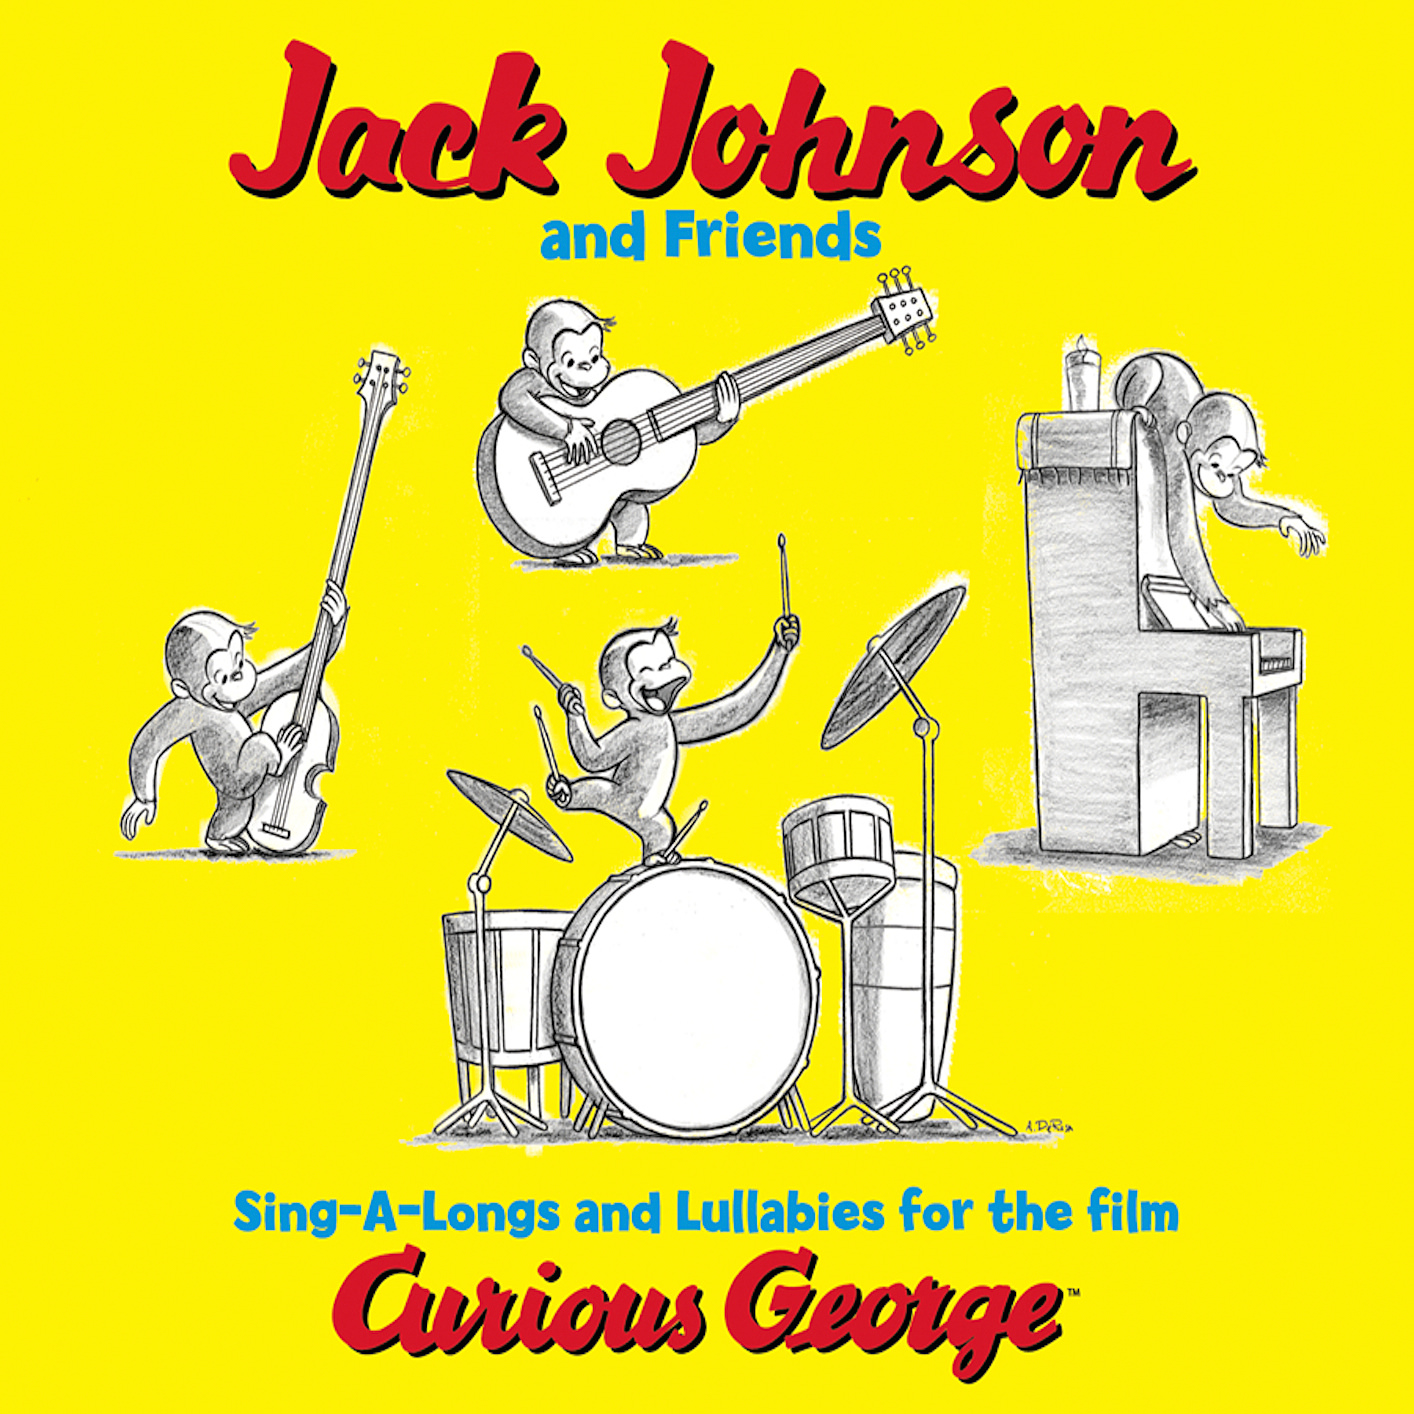 Jack Johnson - Sing-A-Longs And Lullabies For The Film Curious George (2006/2014) [Qobuz FLAC 24bit/96kHz]